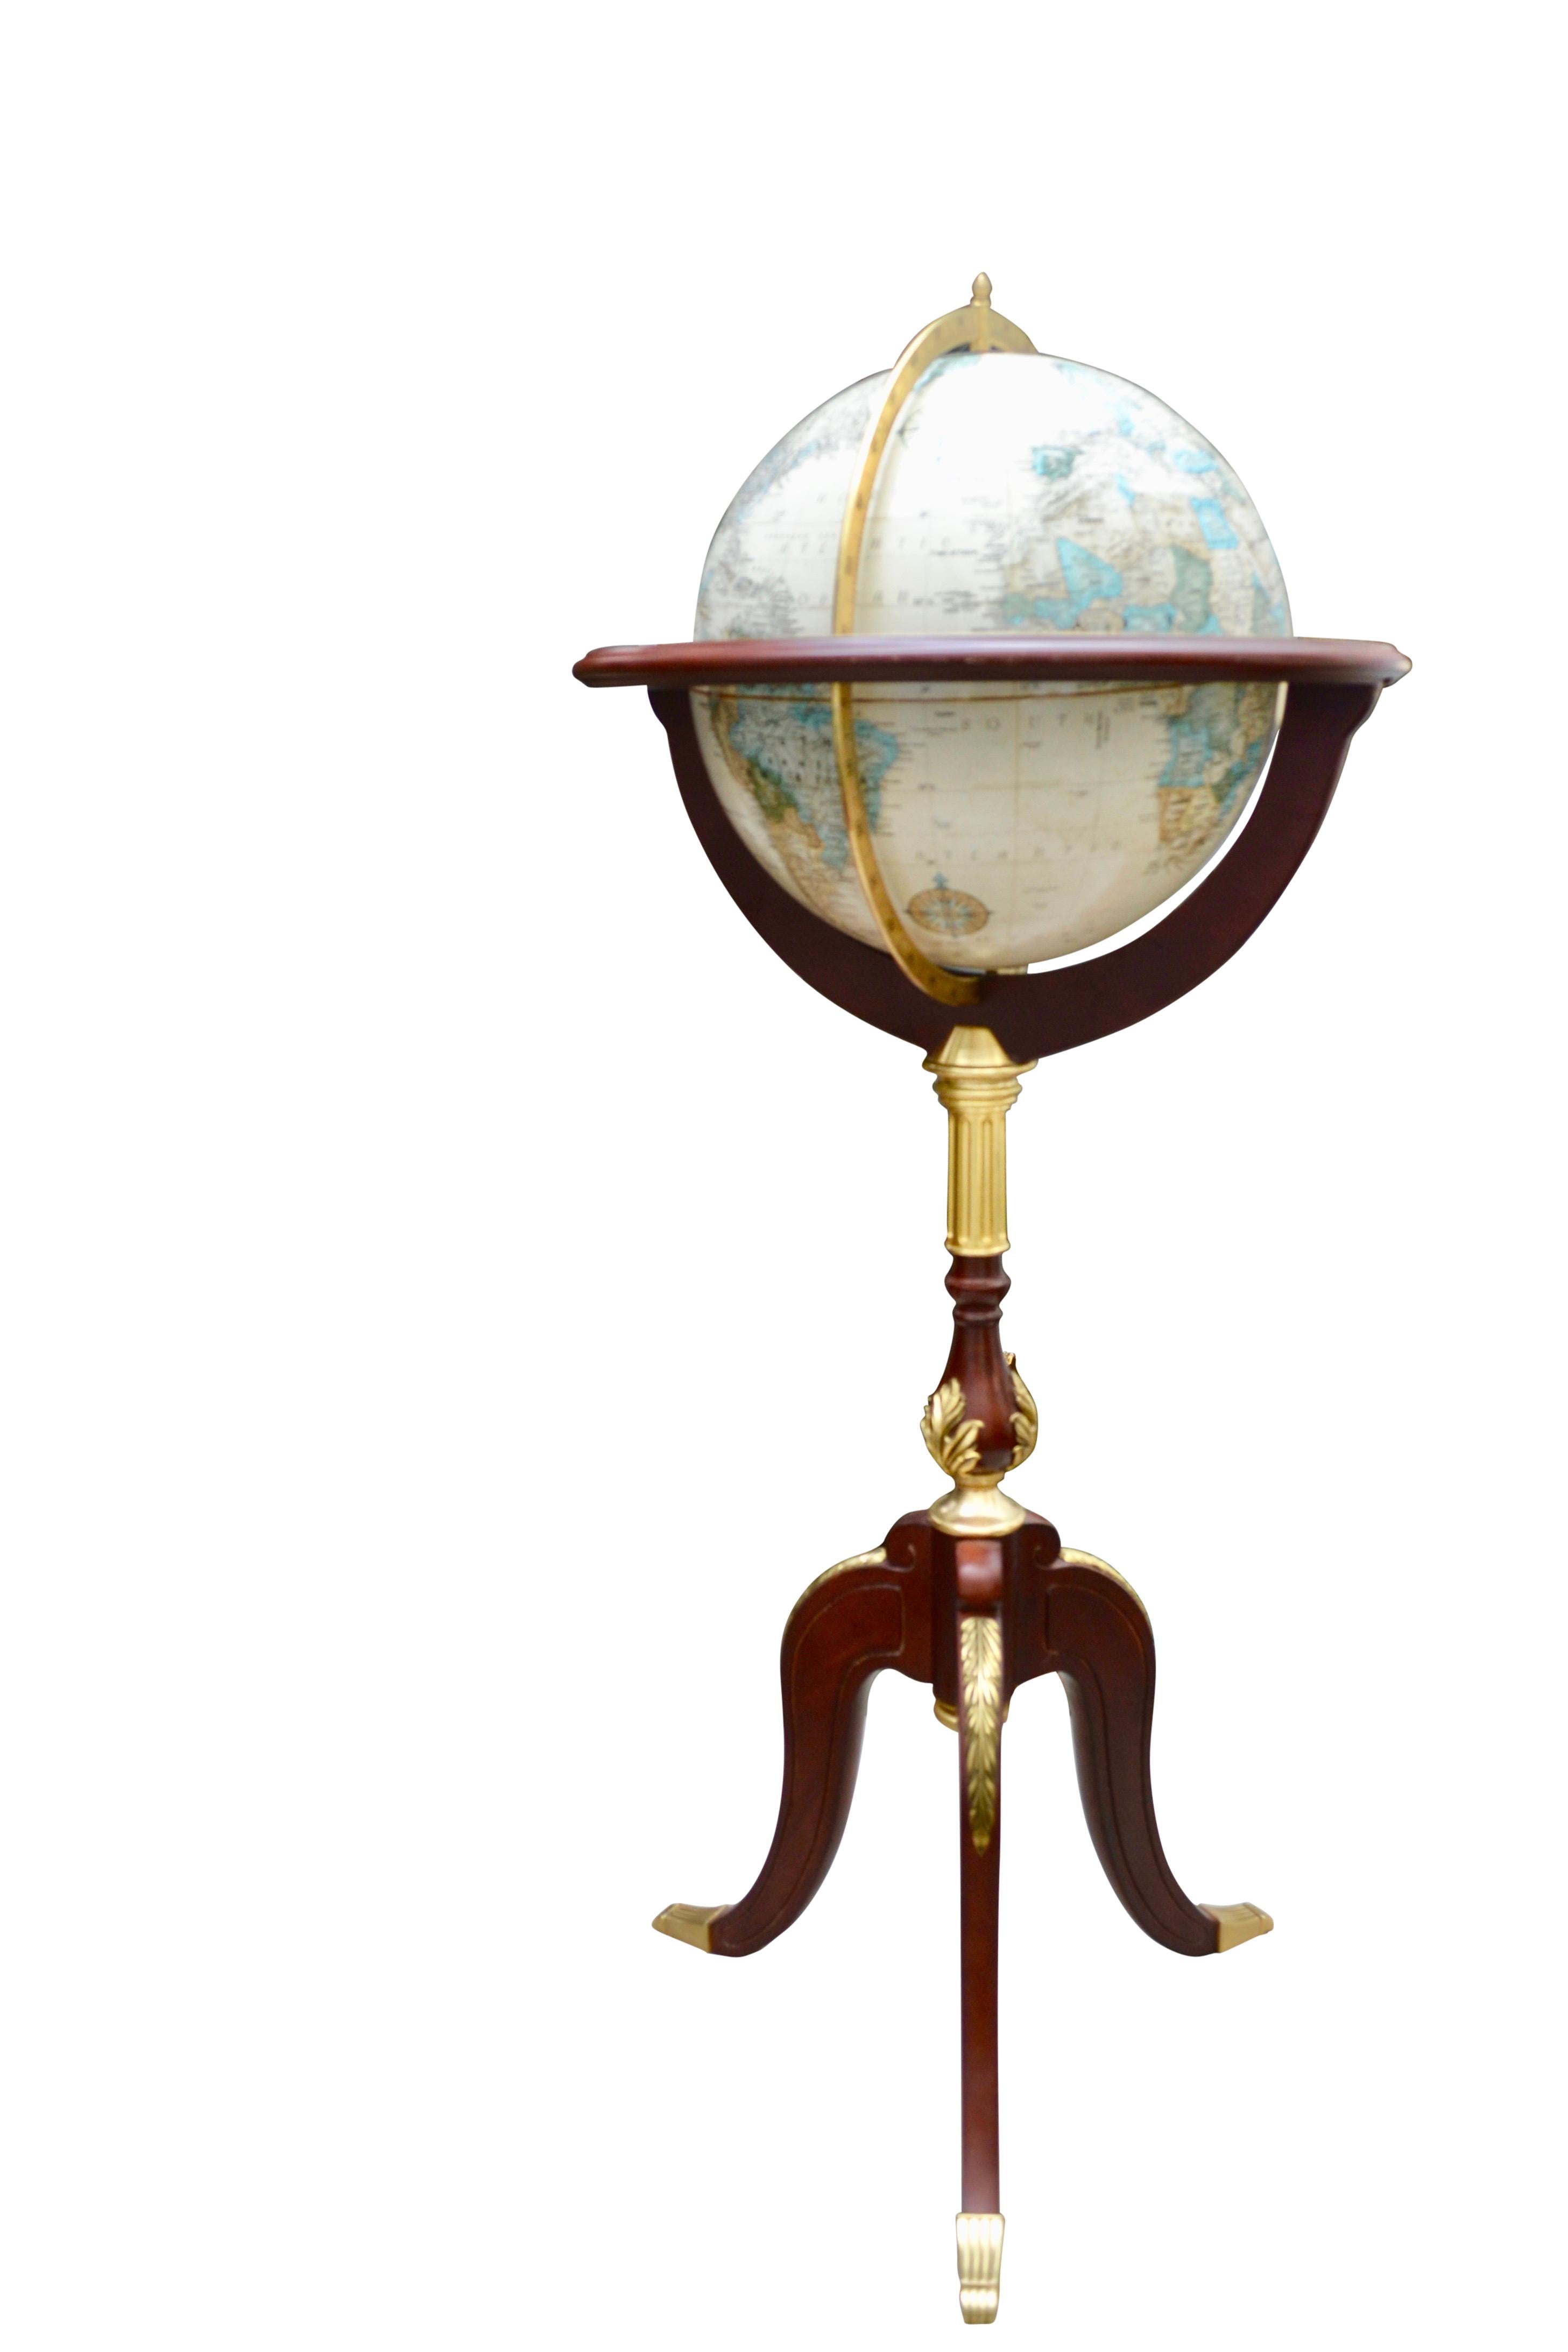 A  rare standing globe manufactured by the Franklin Mint,  to a designed as was issued by the Royal Geographic Society. The globe is mounted on a tripod mahogany base accented by  gilt bronze mounts. 

The globe is in relief and revolves around its